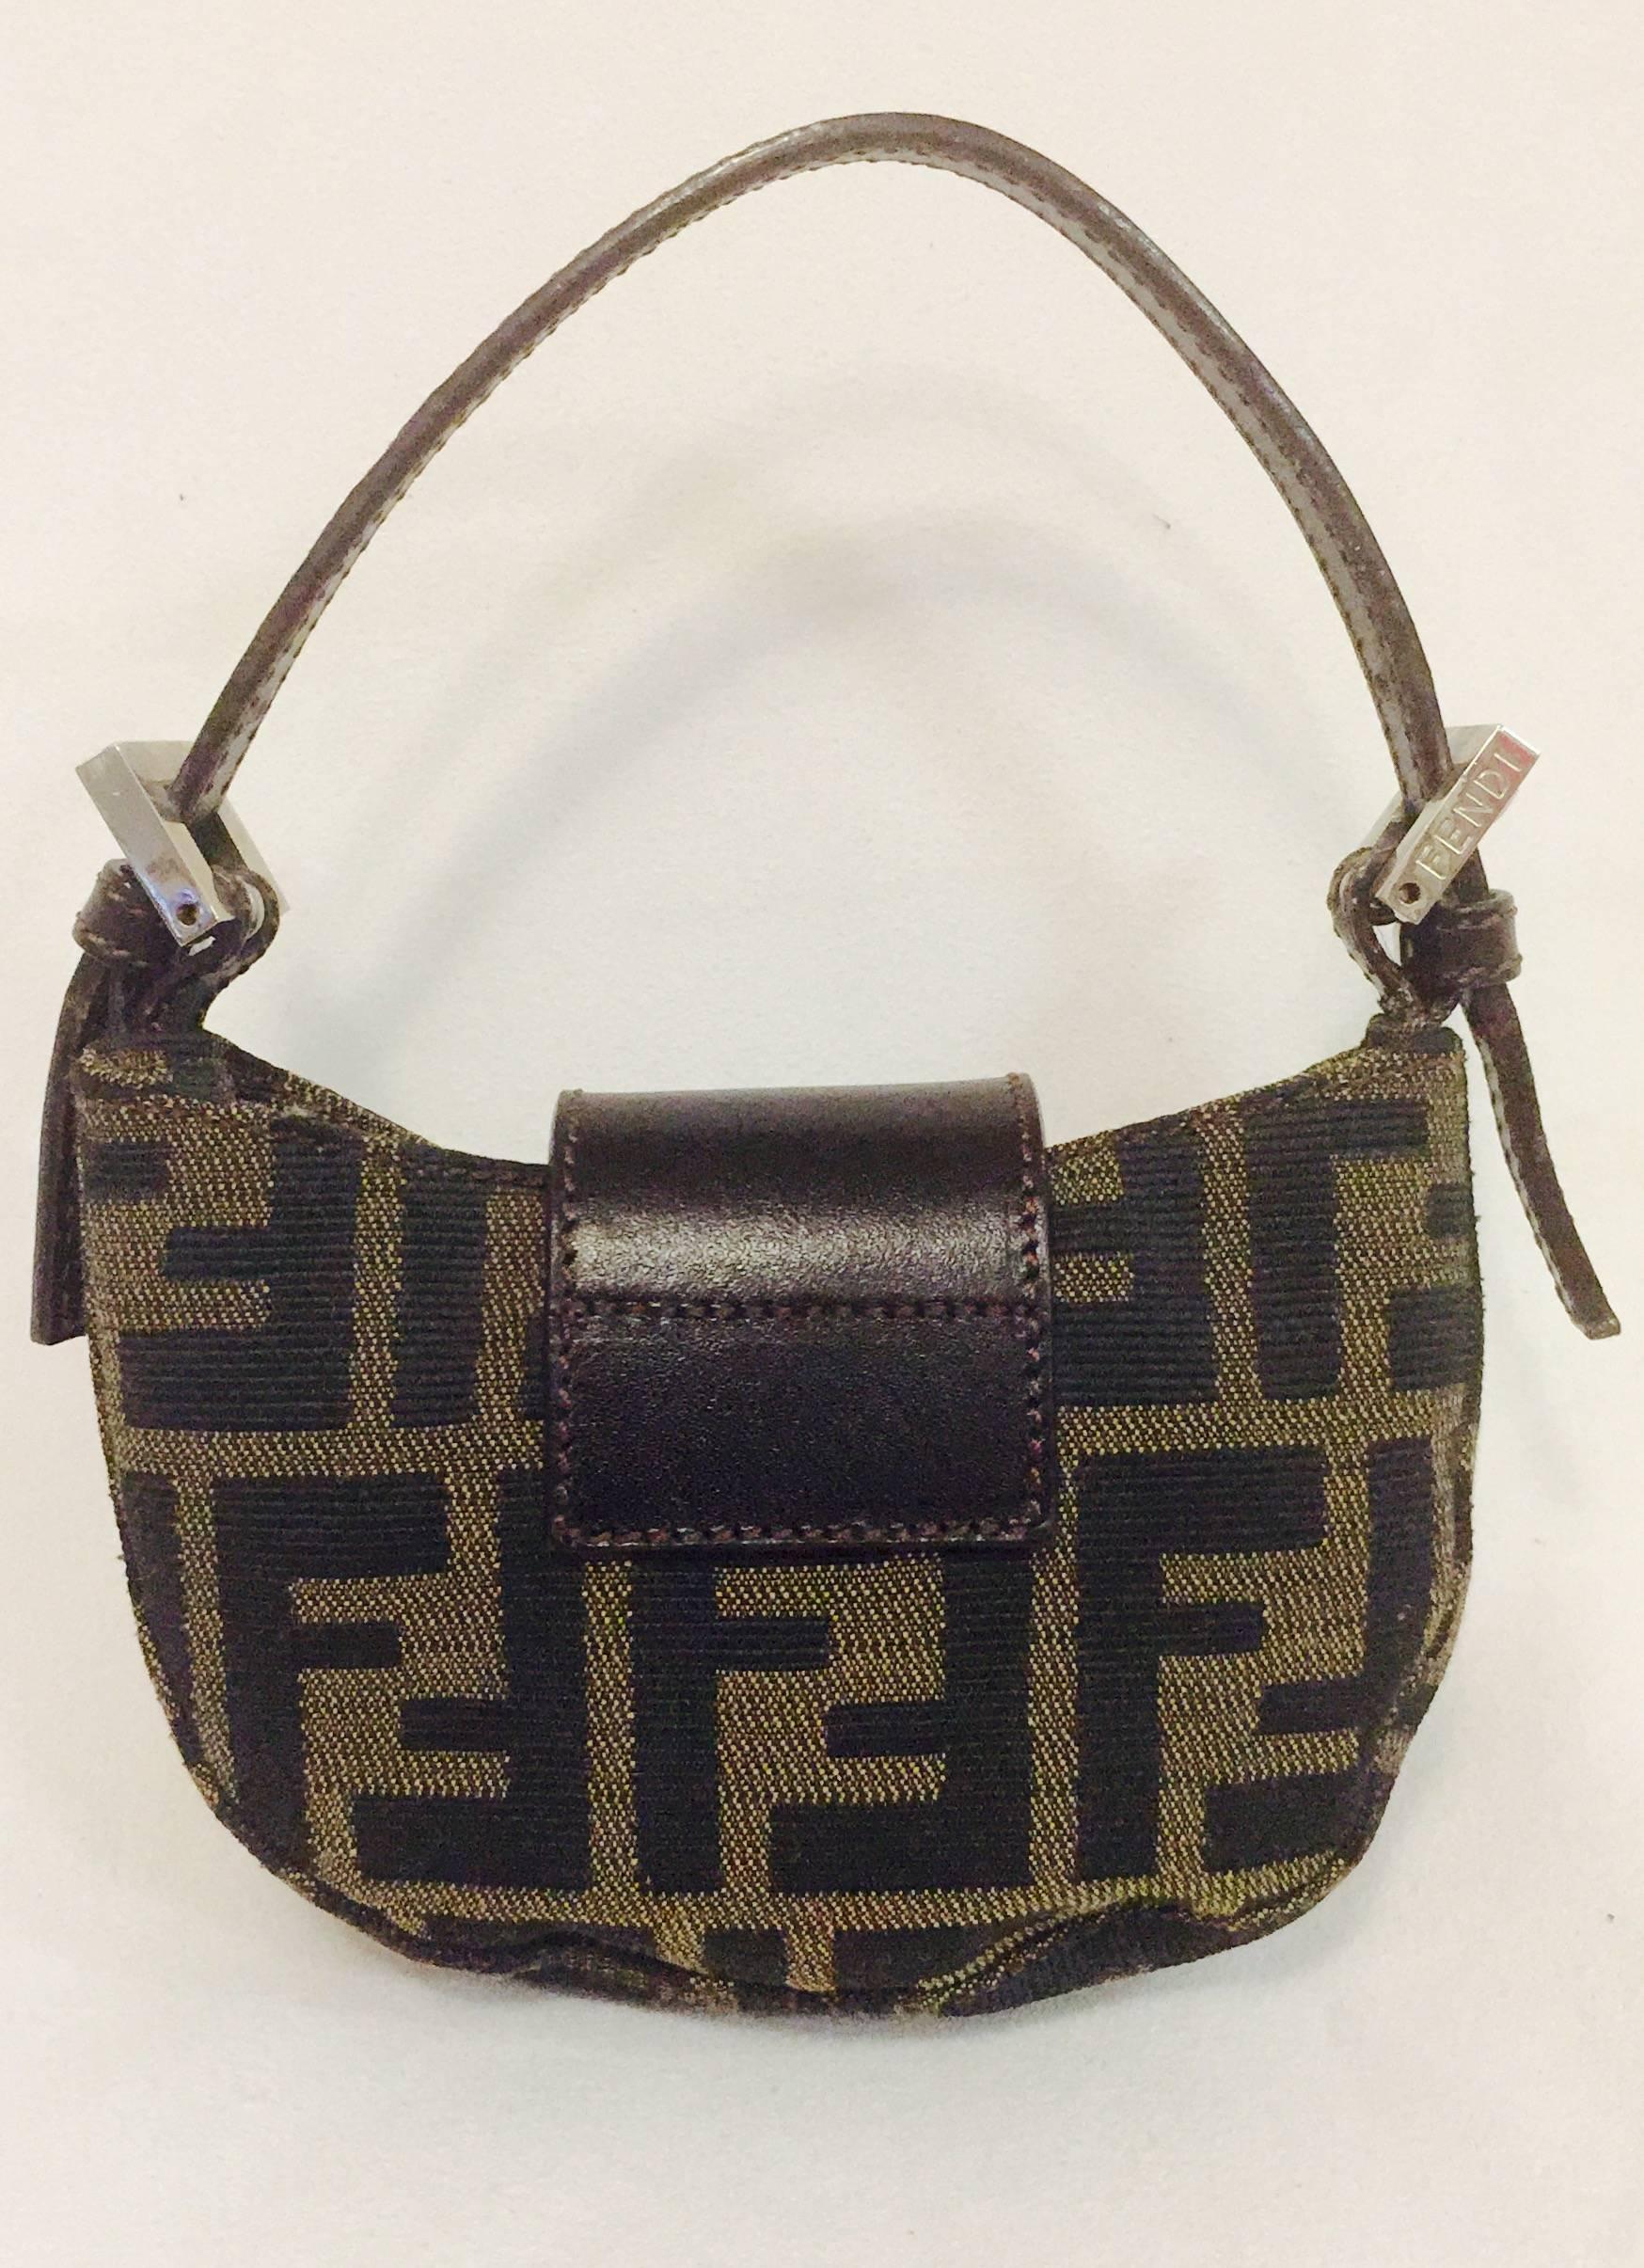 This mini Fendi Zucca Croissant bag says it all: dynamite does come in small packages! This bag is the epitome of City Girl Chic - modern, independent and stylish.  Brown leather flap features iconic Fendi logo and reveals canvas lining. Silver tone